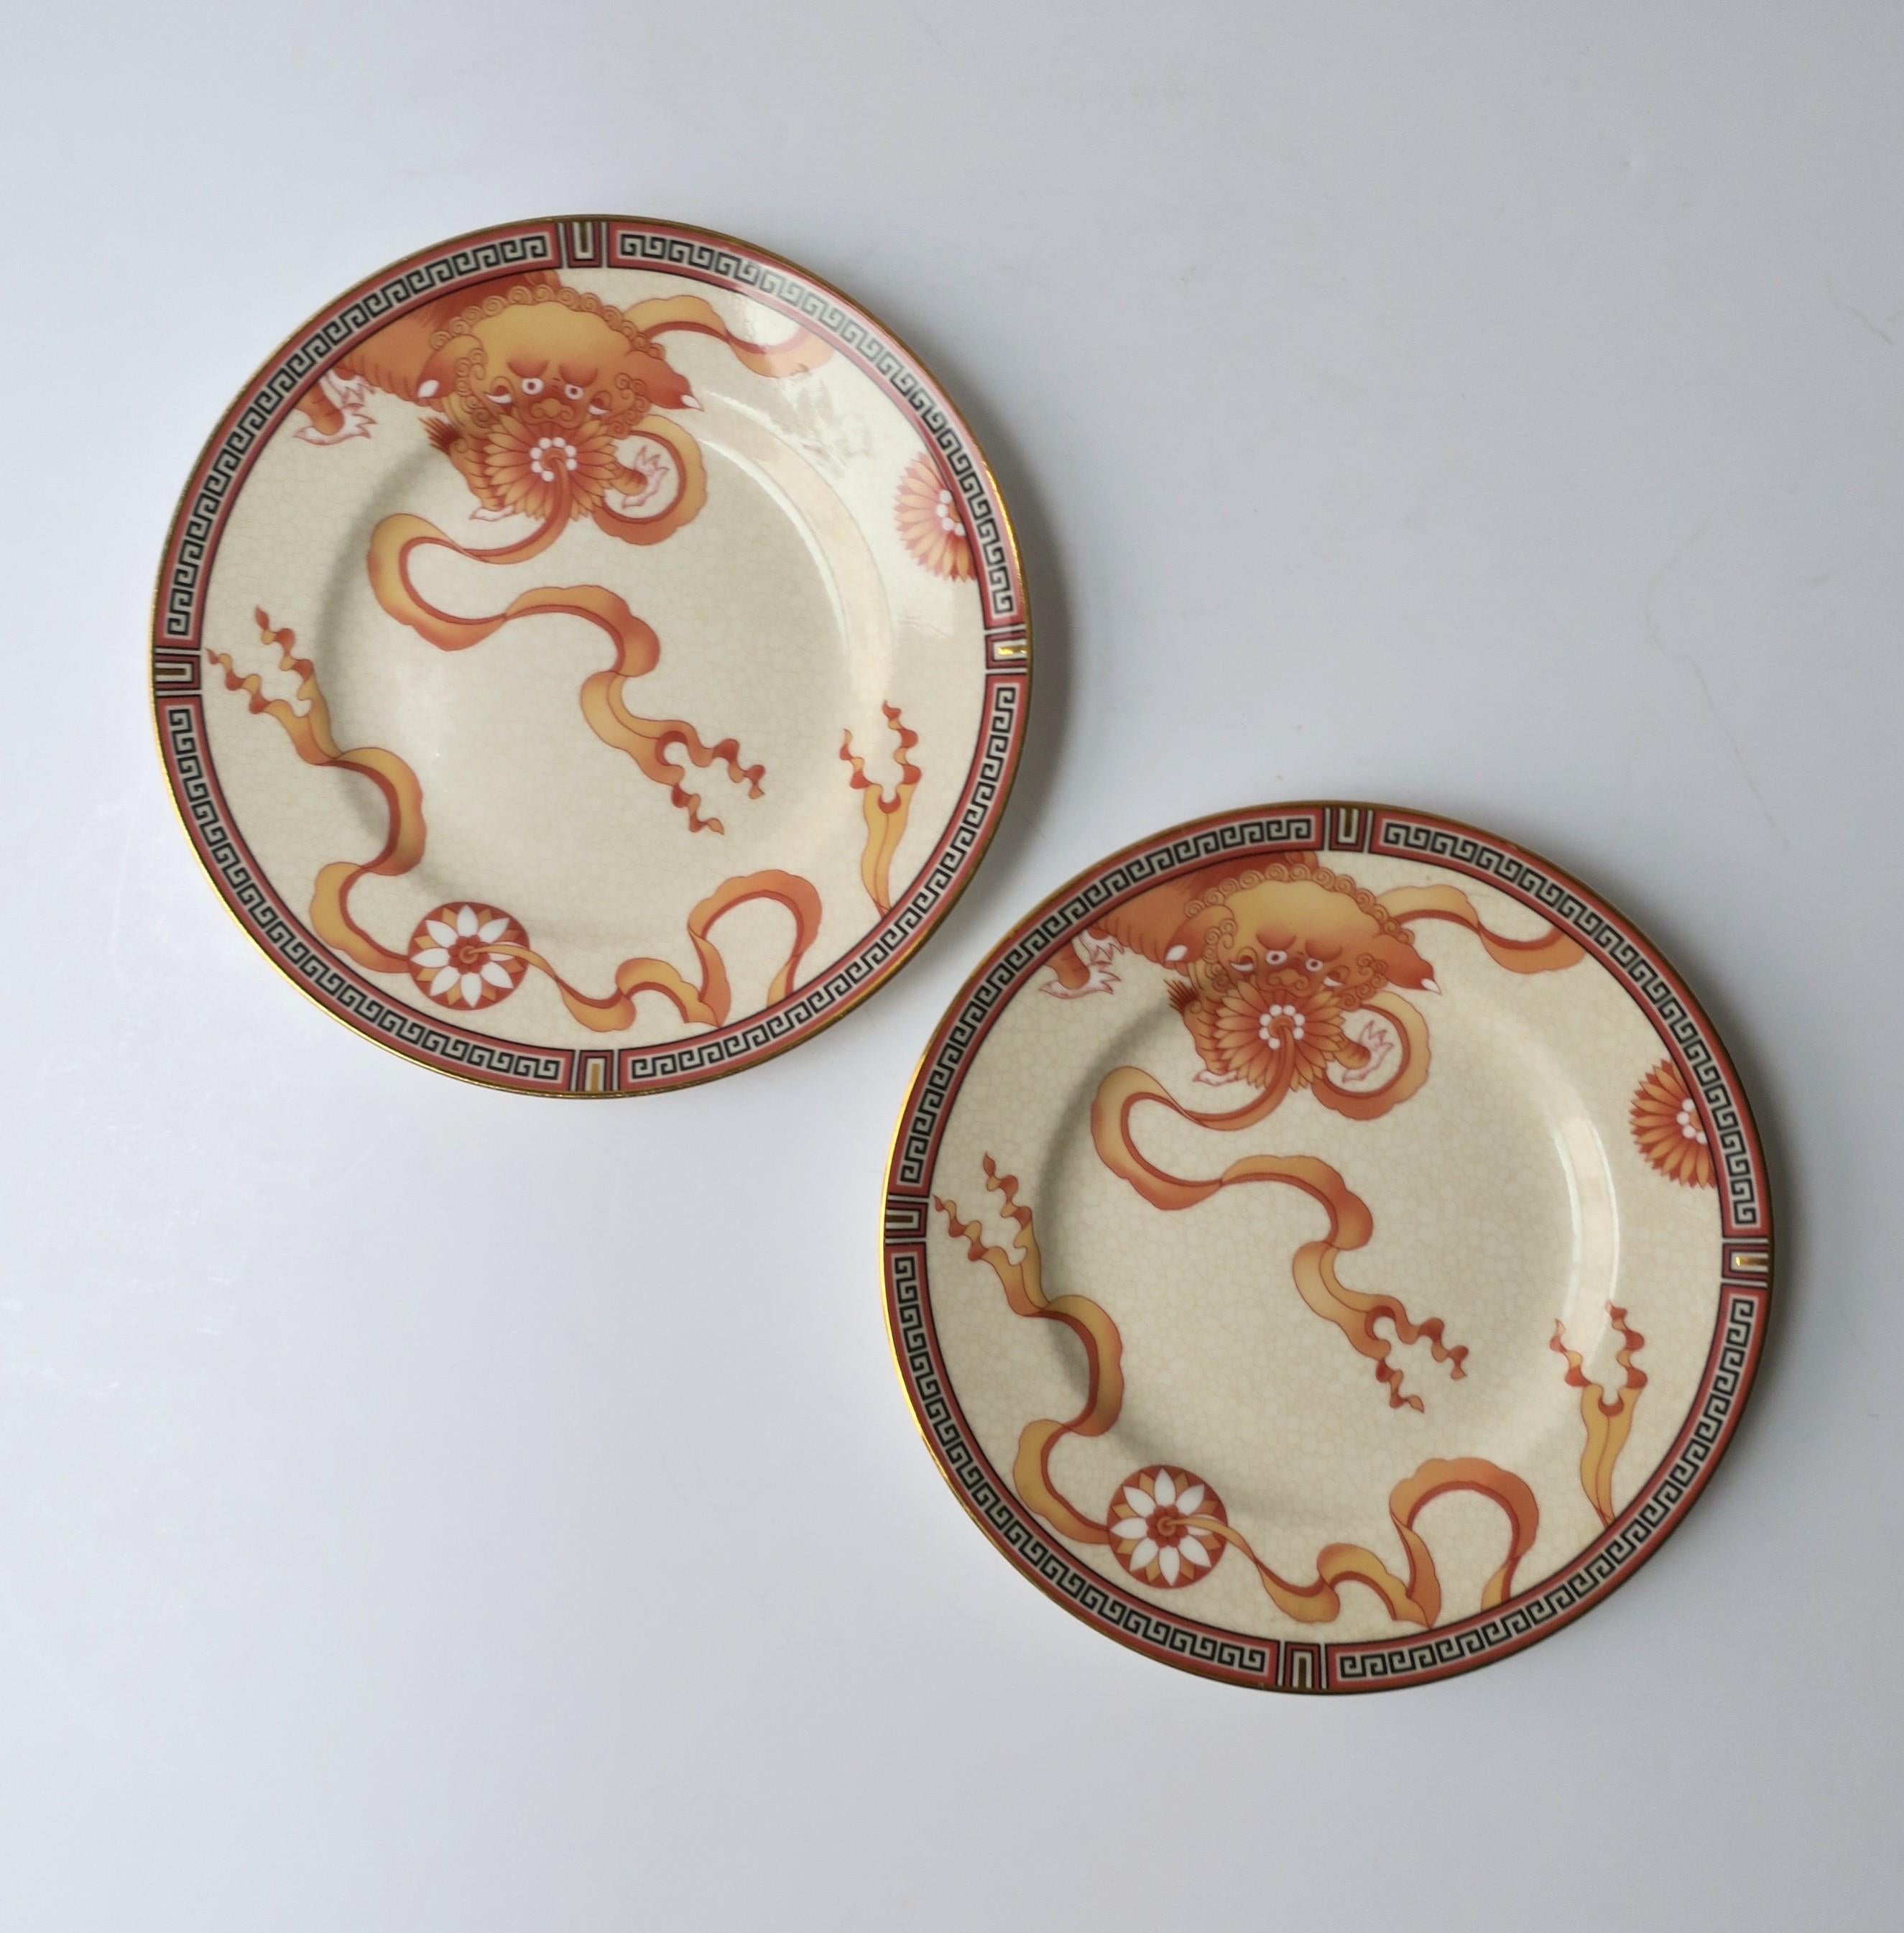 A rare set of two (2) Wedgwood Dynasty collection porcelain bread plates, circa late-20th century, England. A beautiful set of Wedgwood 'Dynasty' collection porcelain bread plates, or small appetizer plates, with black Greek-Key design around edge